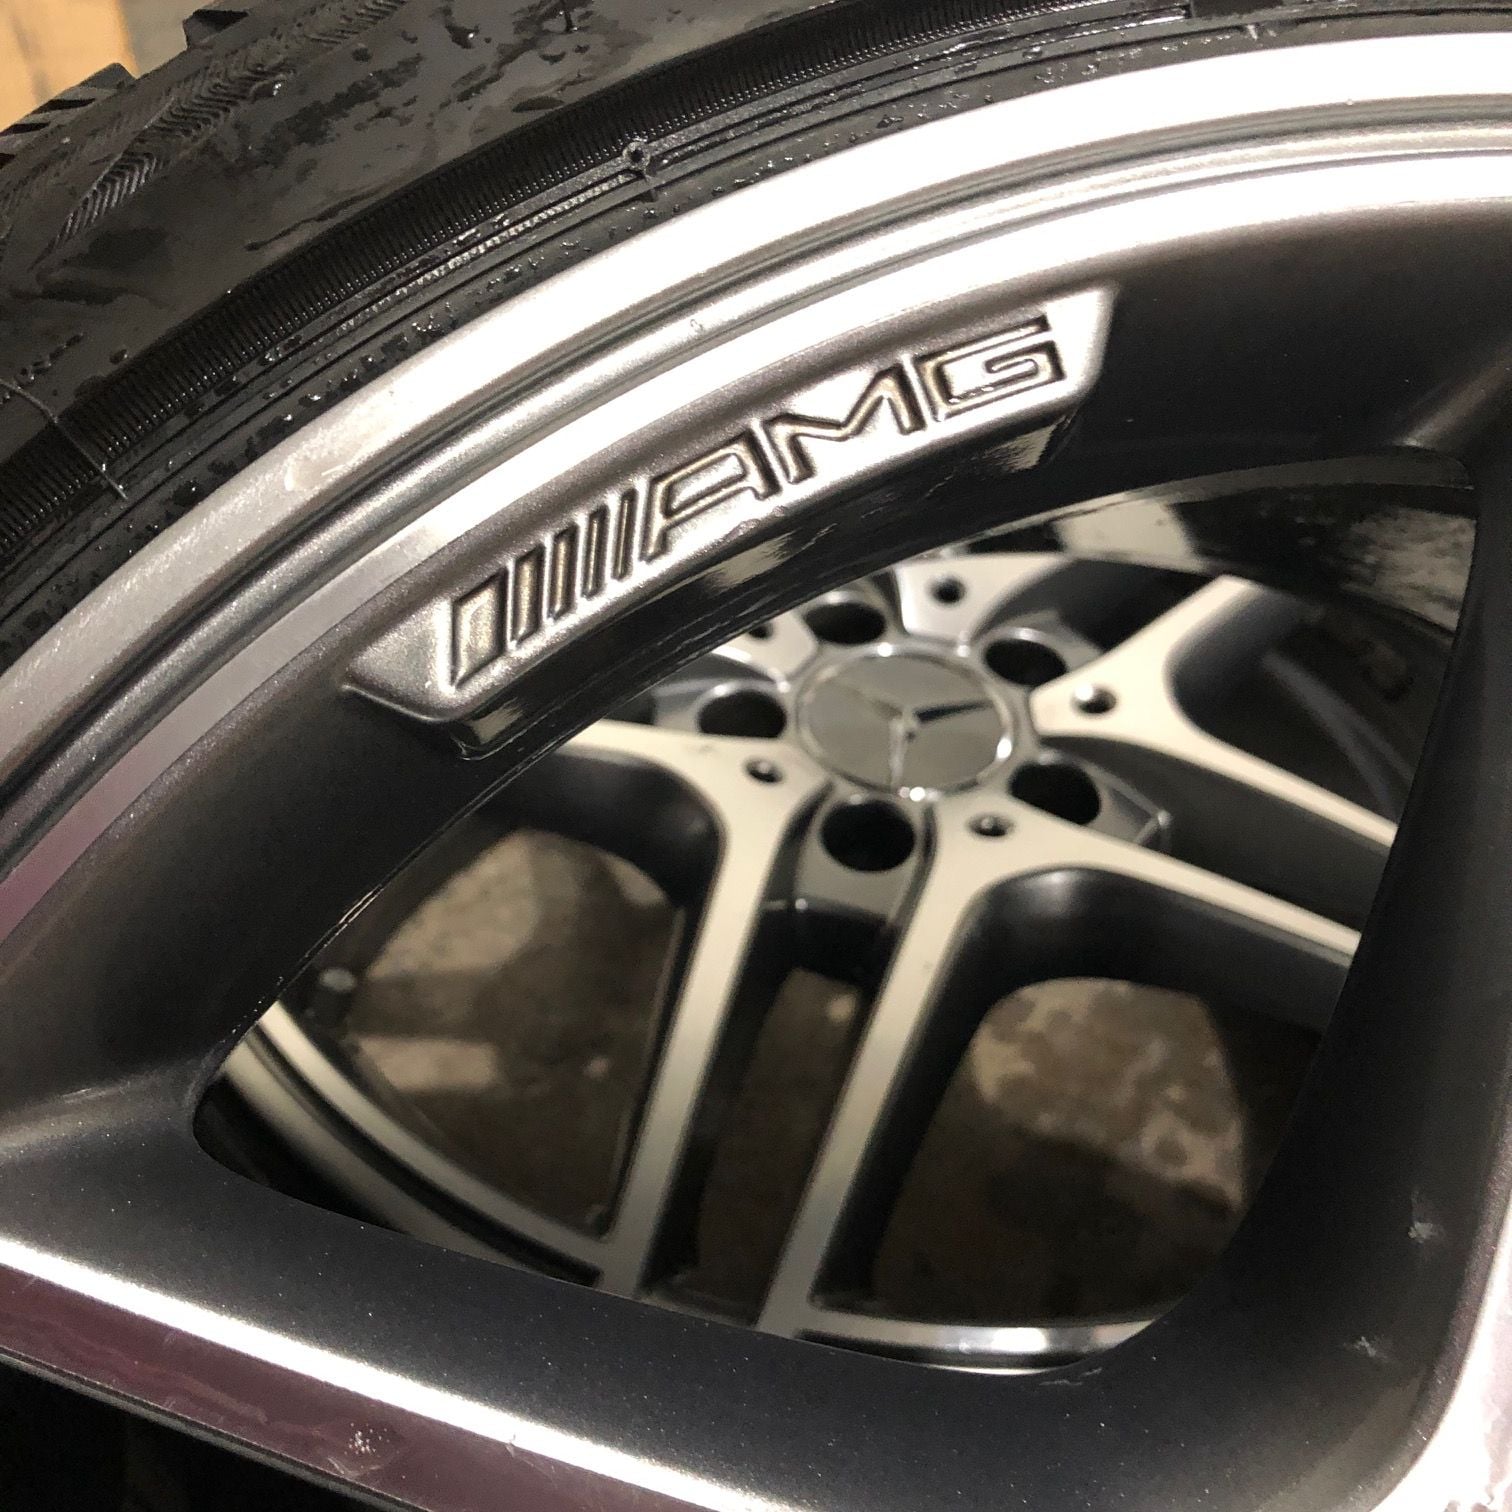 Wheels and Tires/Axles - W204 Mercedes Benz Wheels AMG & Blizzak LM60 Run Flat Winter Tires 235/40/18 - Used - 2008 to 2014 Mercedes-Benz C63 AMG - Enfield, CT 06083, United States